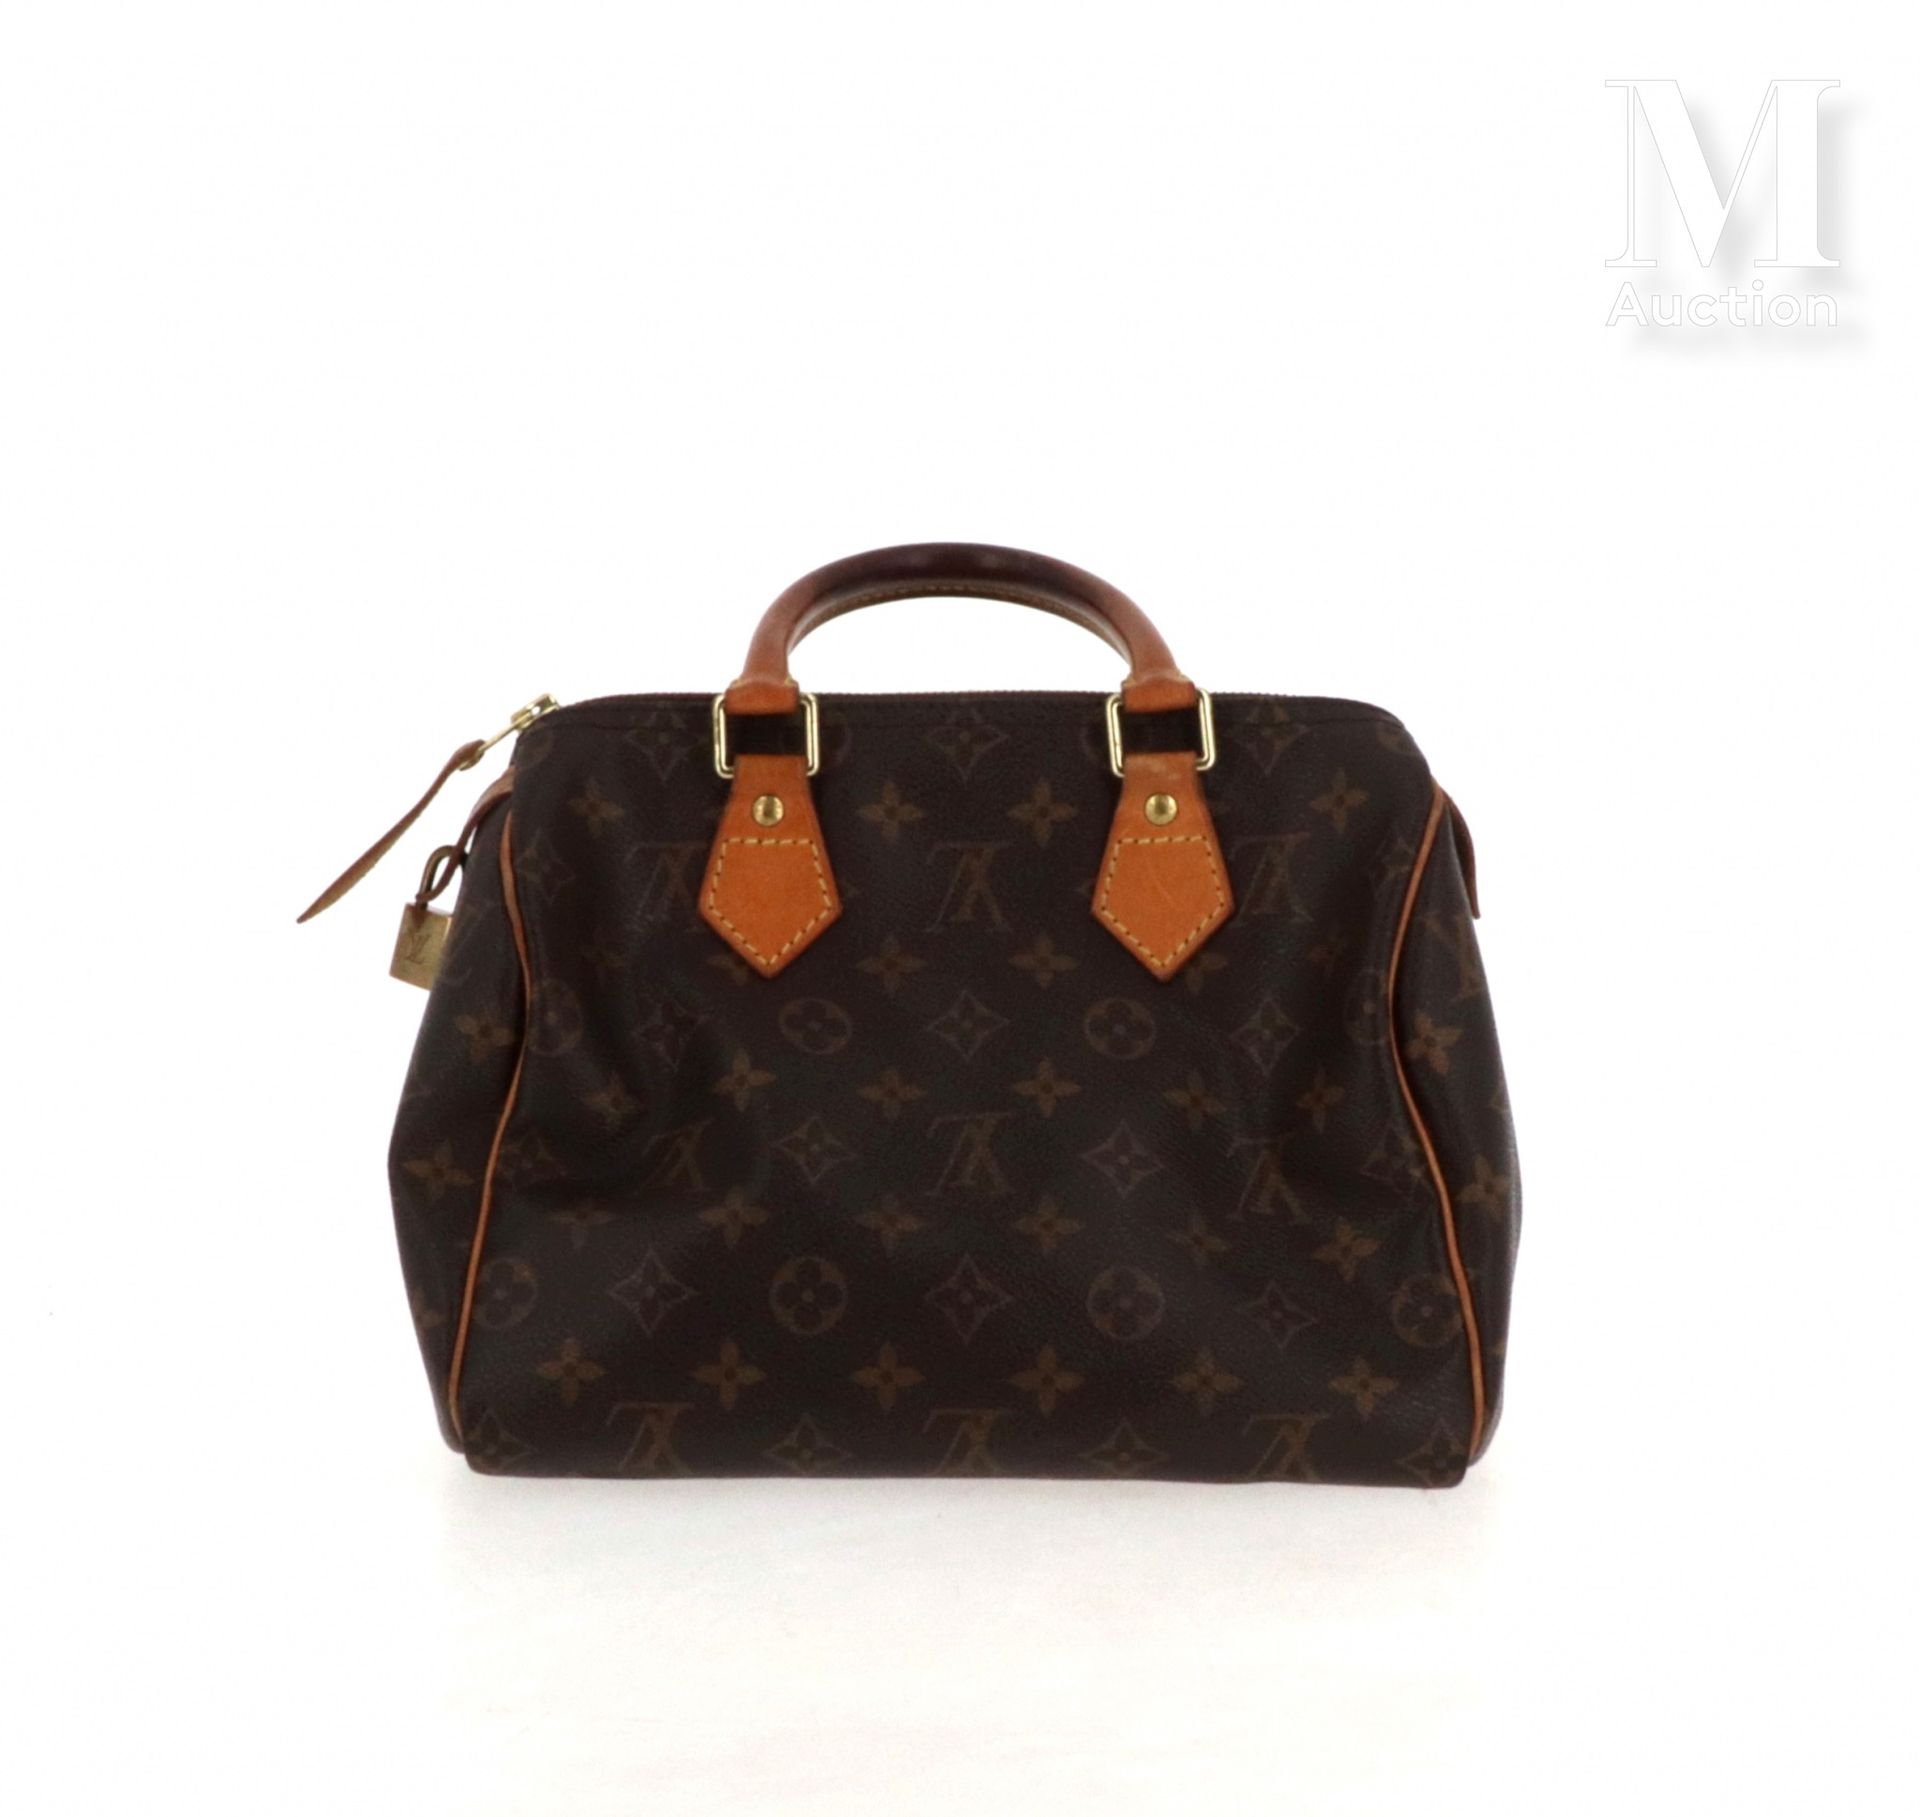 LOUIS VUITTON Speedy" bag 25

Monogram canvas and natural leather, gold brass tr&hellip;